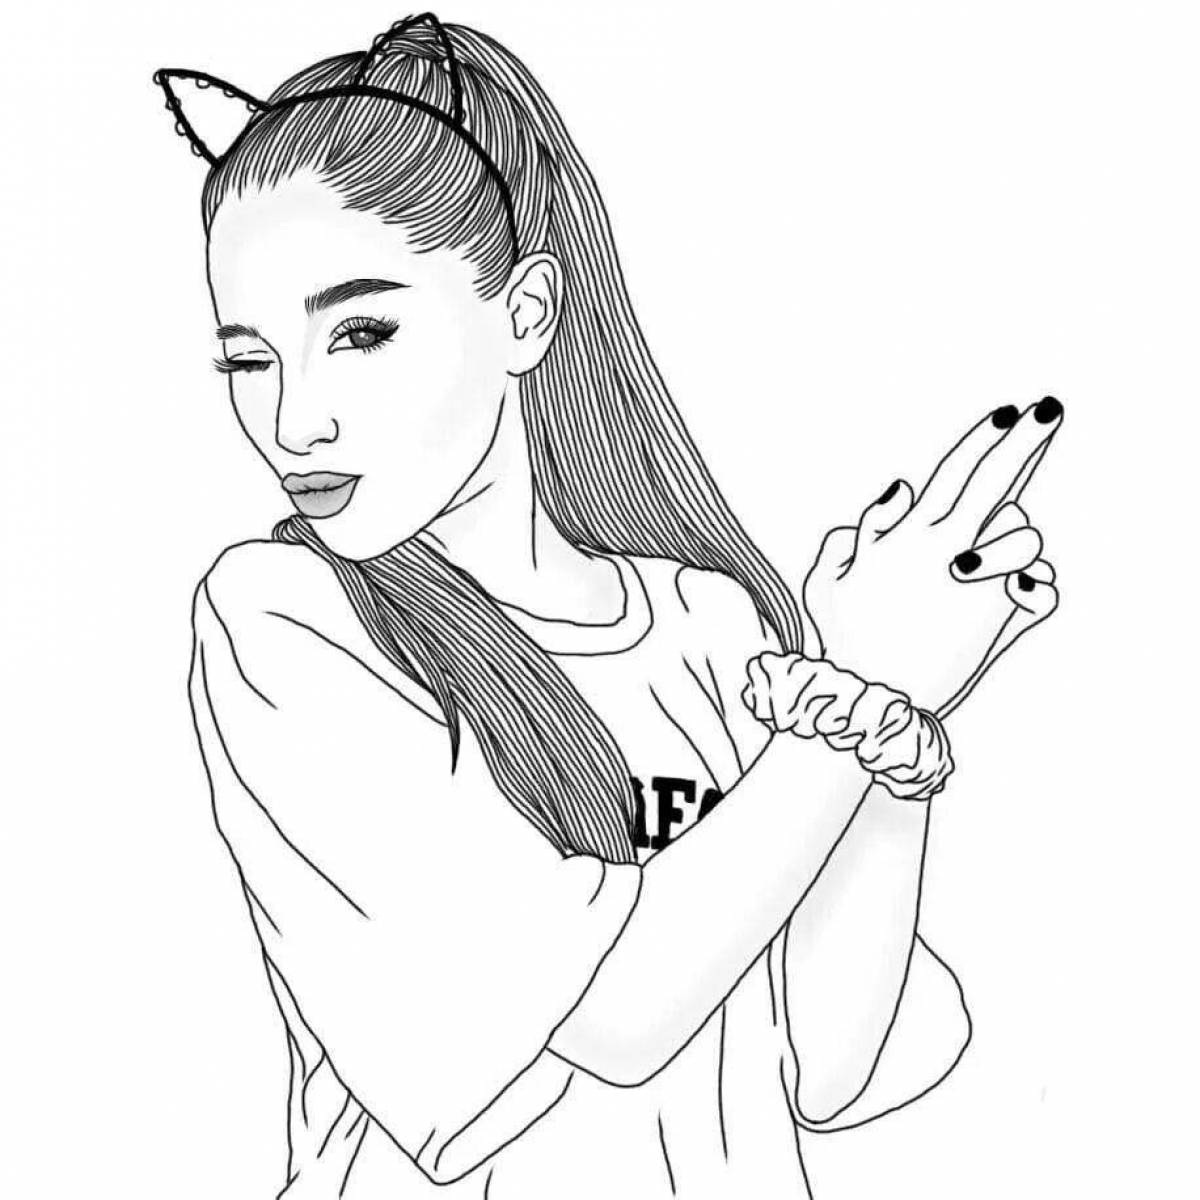 Ariana Grande's exquisite coloring page